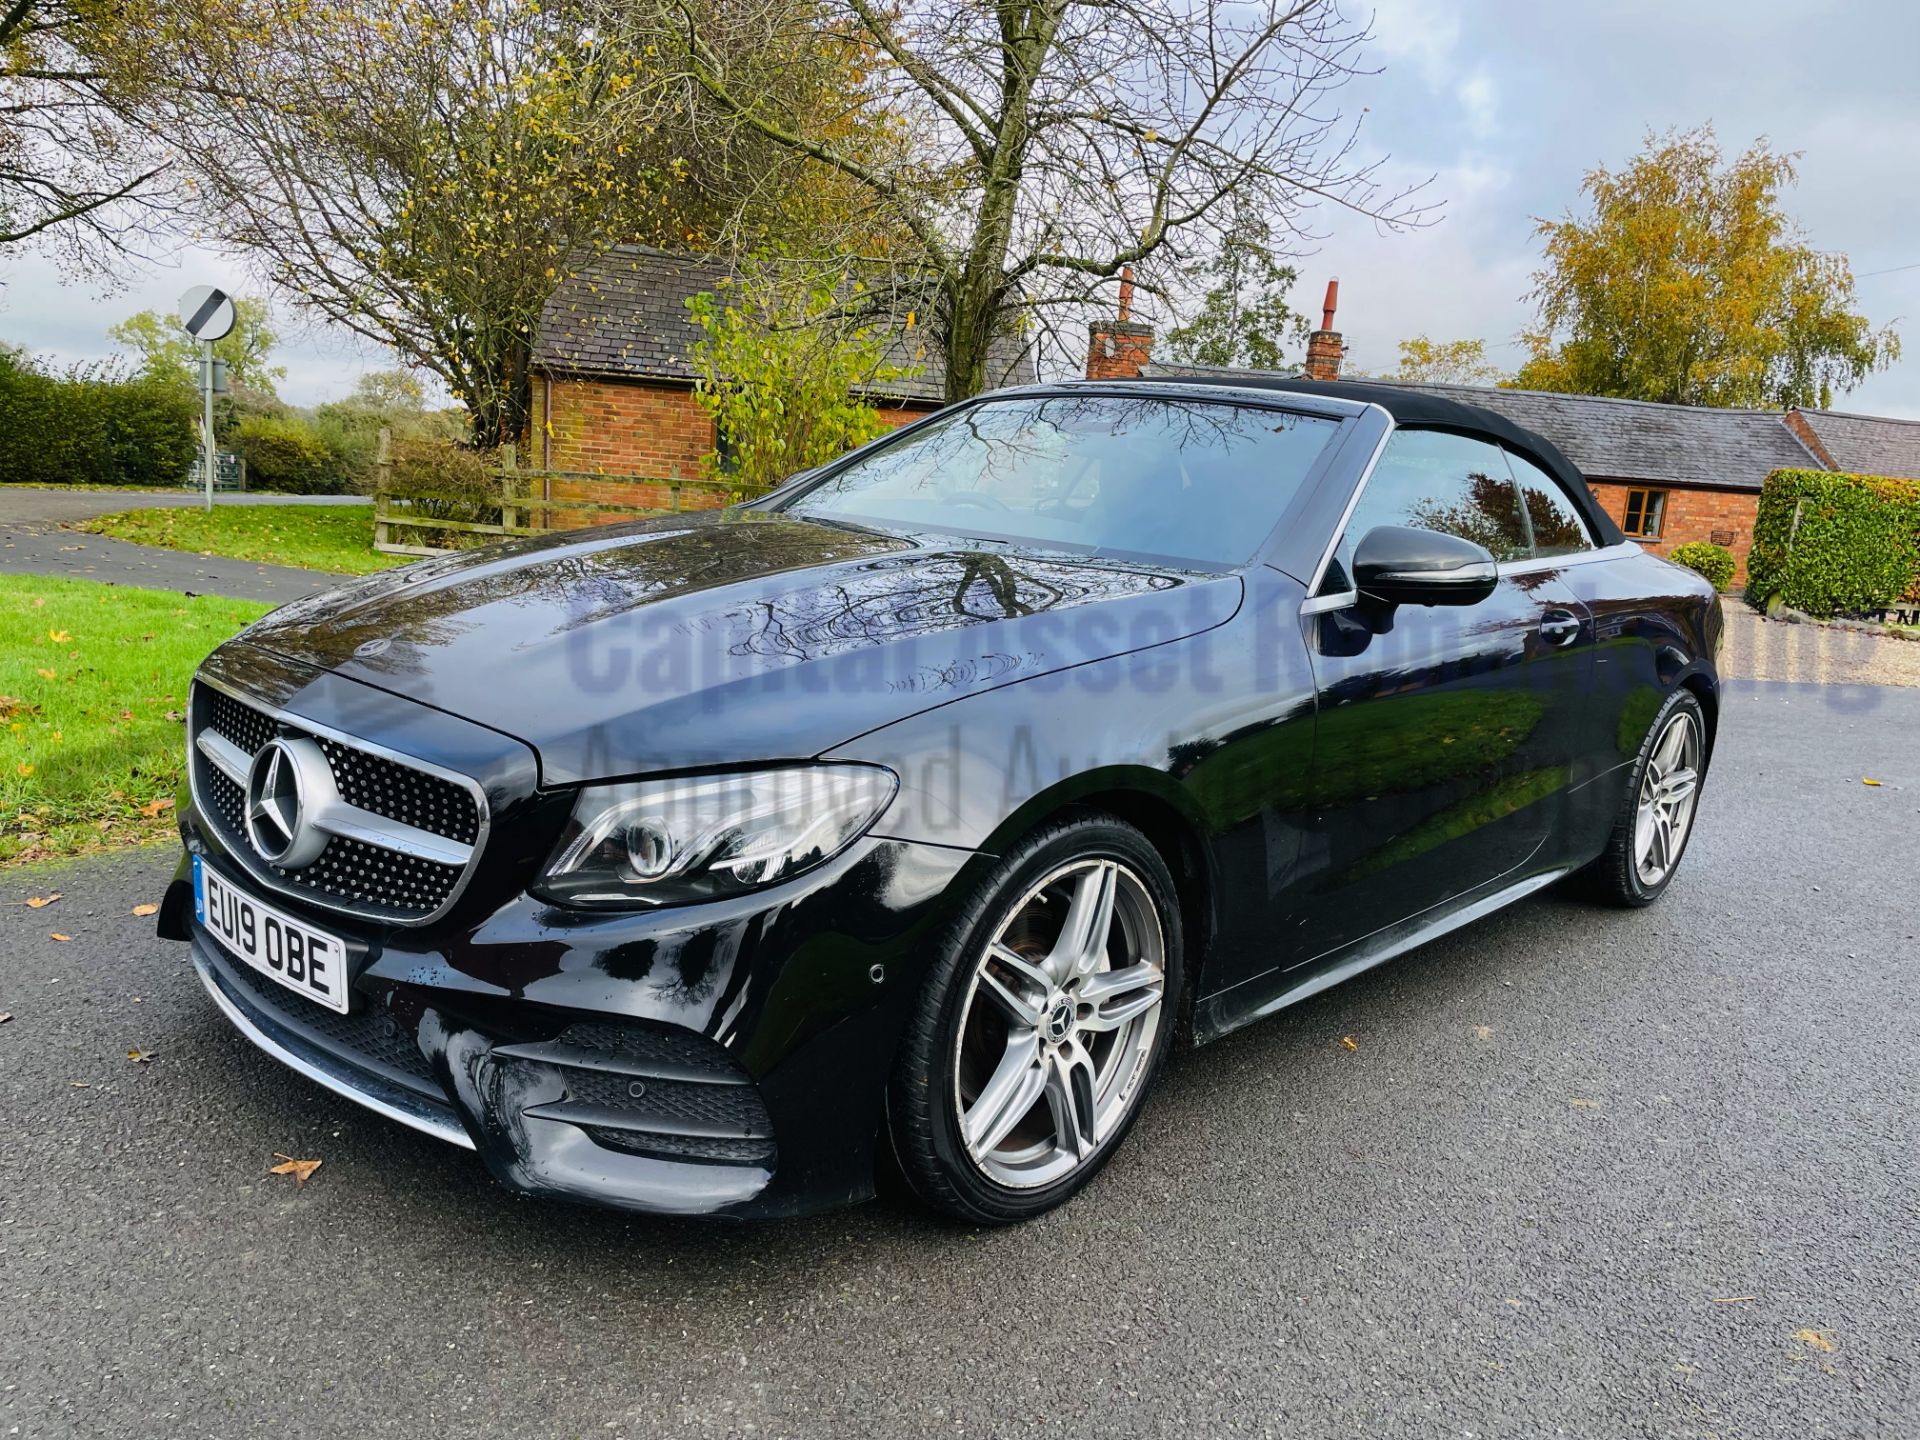 MERCEDES-BENZ E220D *AMG LINE - CABRIOLET* (2019 - EURO 6) '9G TRONIC AUTO - SAT NAV' *FULLY LOADED* - Image 10 of 66